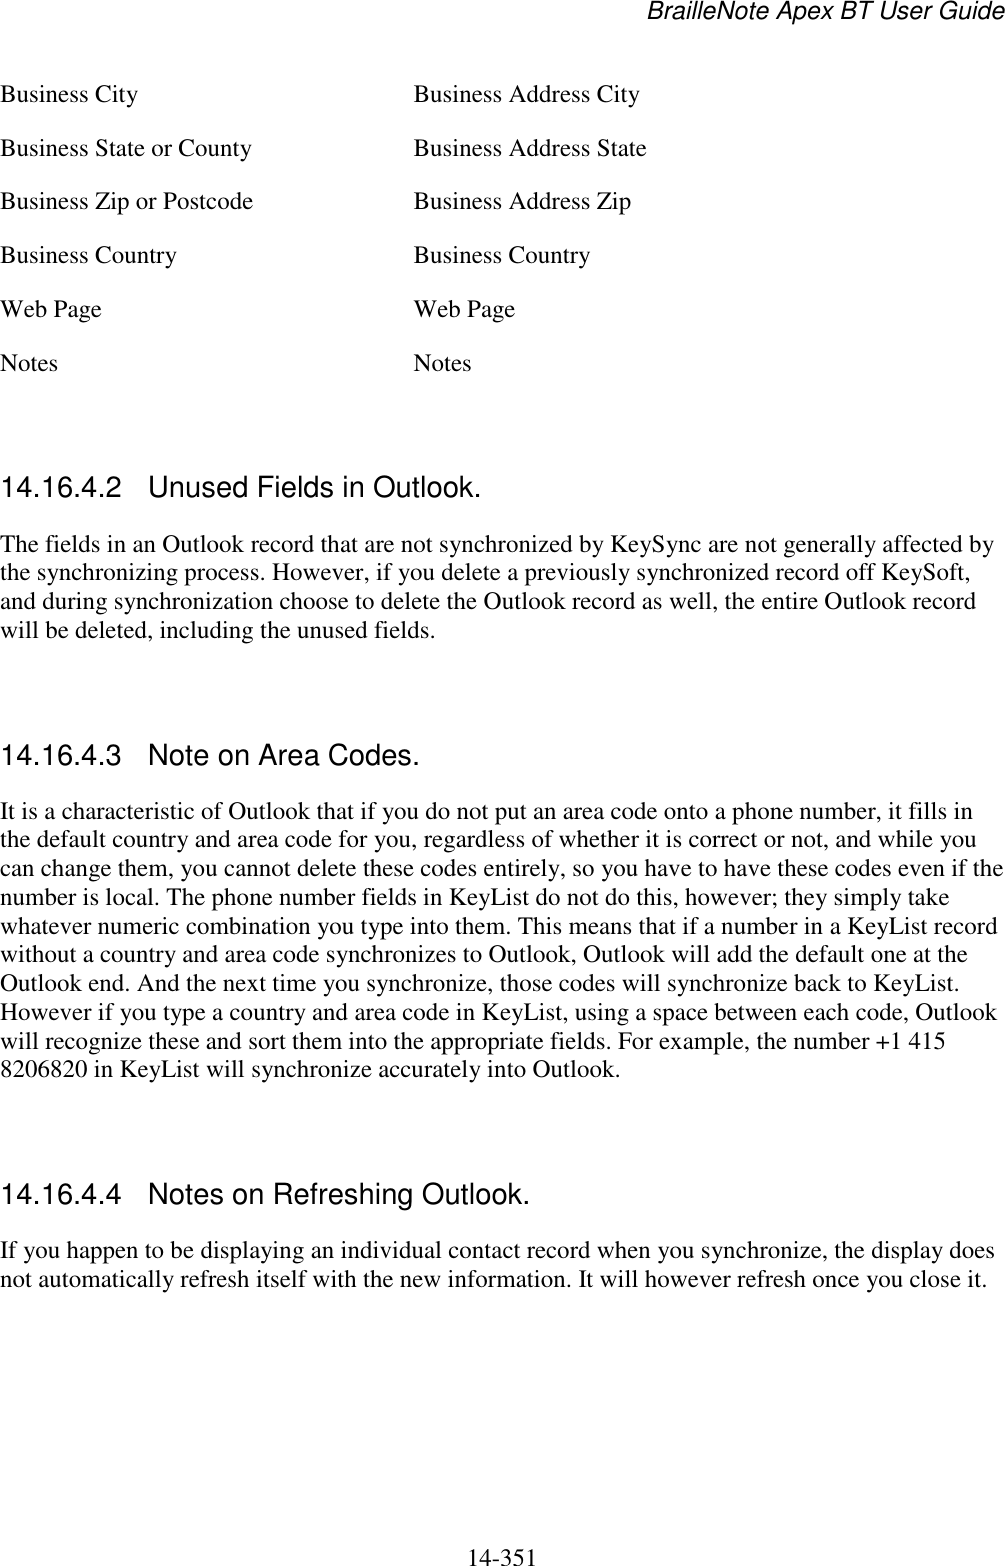 BrailleNote Apex BT User Guide   14-351   Business City  Business Address City Business State or County  Business Address State Business Zip or Postcode  Business Address Zip Business Country  Business Country Web Page  Web Page Notes  Notes   14.16.4.2  Unused Fields in Outlook. The fields in an Outlook record that are not synchronized by KeySync are not generally affected by the synchronizing process. However, if you delete a previously synchronized record off KeySoft, and during synchronization choose to delete the Outlook record as well, the entire Outlook record will be deleted, including the unused fields.   14.16.4.3  Note on Area Codes. It is a characteristic of Outlook that if you do not put an area code onto a phone number, it fills in the default country and area code for you, regardless of whether it is correct or not, and while you can change them, you cannot delete these codes entirely, so you have to have these codes even if the number is local. The phone number fields in KeyList do not do this, however; they simply take whatever numeric combination you type into them. This means that if a number in a KeyList record without a country and area code synchronizes to Outlook, Outlook will add the default one at the Outlook end. And the next time you synchronize, those codes will synchronize back to KeyList. However if you type a country and area code in KeyList, using a space between each code, Outlook will recognize these and sort them into the appropriate fields. For example, the number +1 415 8206820 in KeyList will synchronize accurately into Outlook.   14.16.4.4  Notes on Refreshing Outlook. If you happen to be displaying an individual contact record when you synchronize, the display does not automatically refresh itself with the new information. It will however refresh once you close it.   